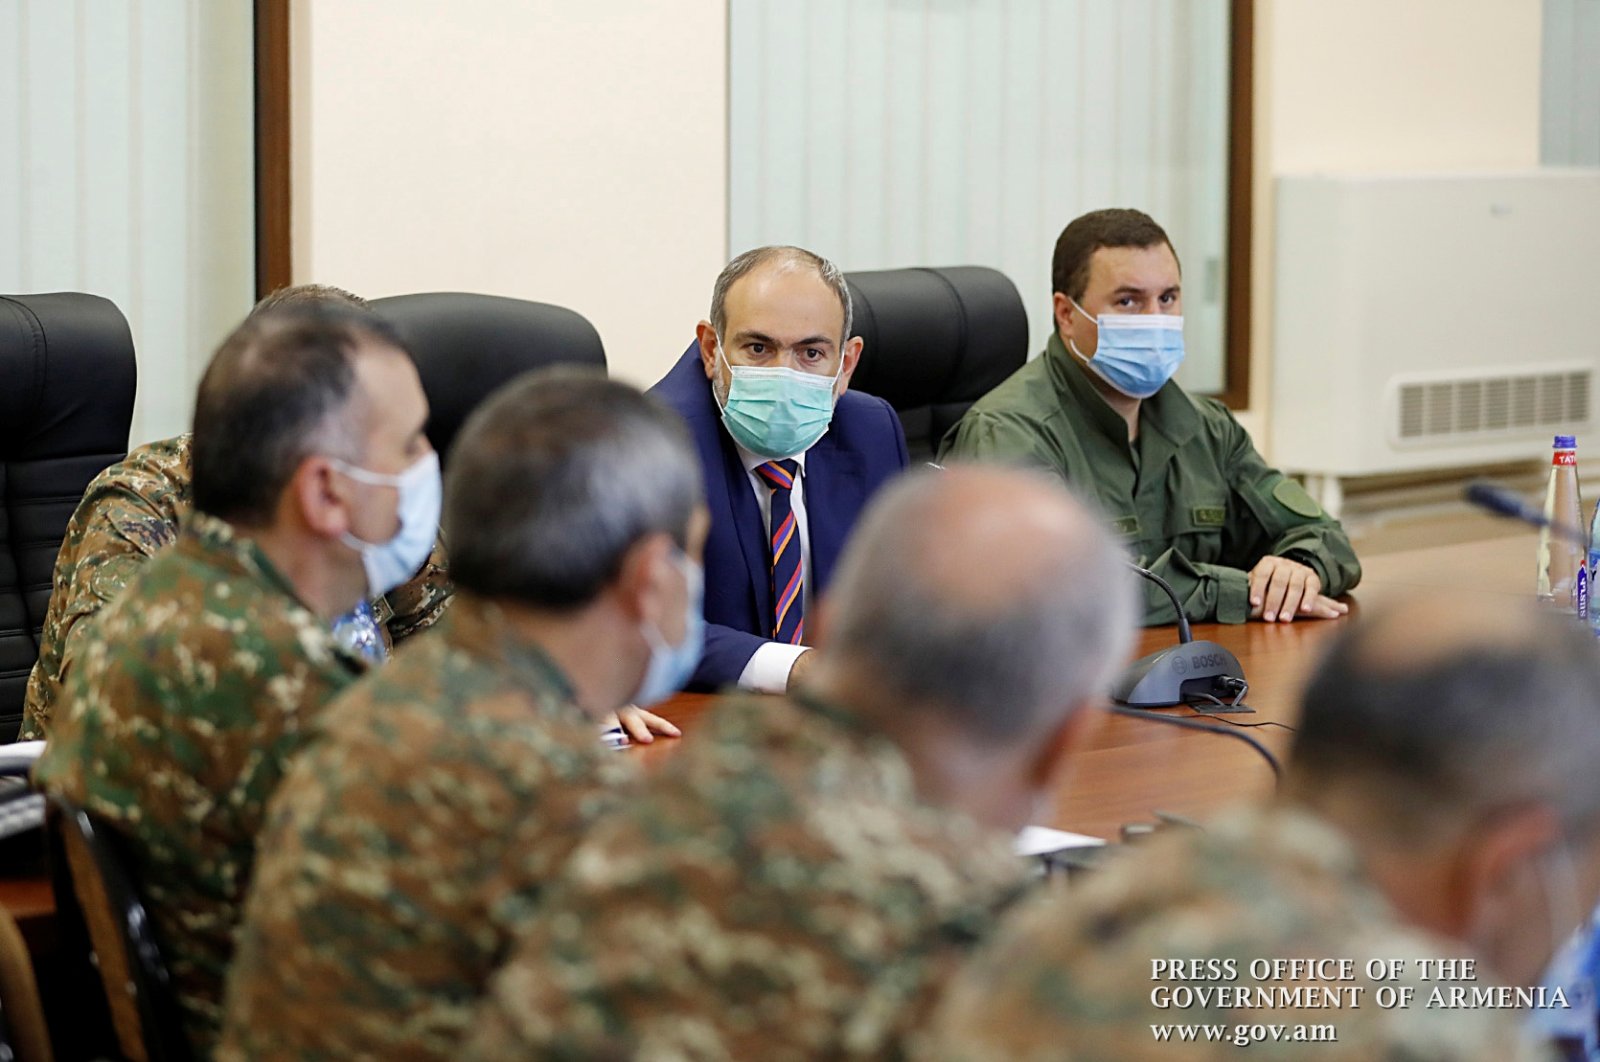 Armenian Prime Minister Nikol Pashinyan meets with the country's military leadership following the clashes with Azerbaijan over Nagorno-Karabakh in Yerevan, Armenia, Sept. 27, 2020. (Press Office of Armenian Government/Handout via Reuters)